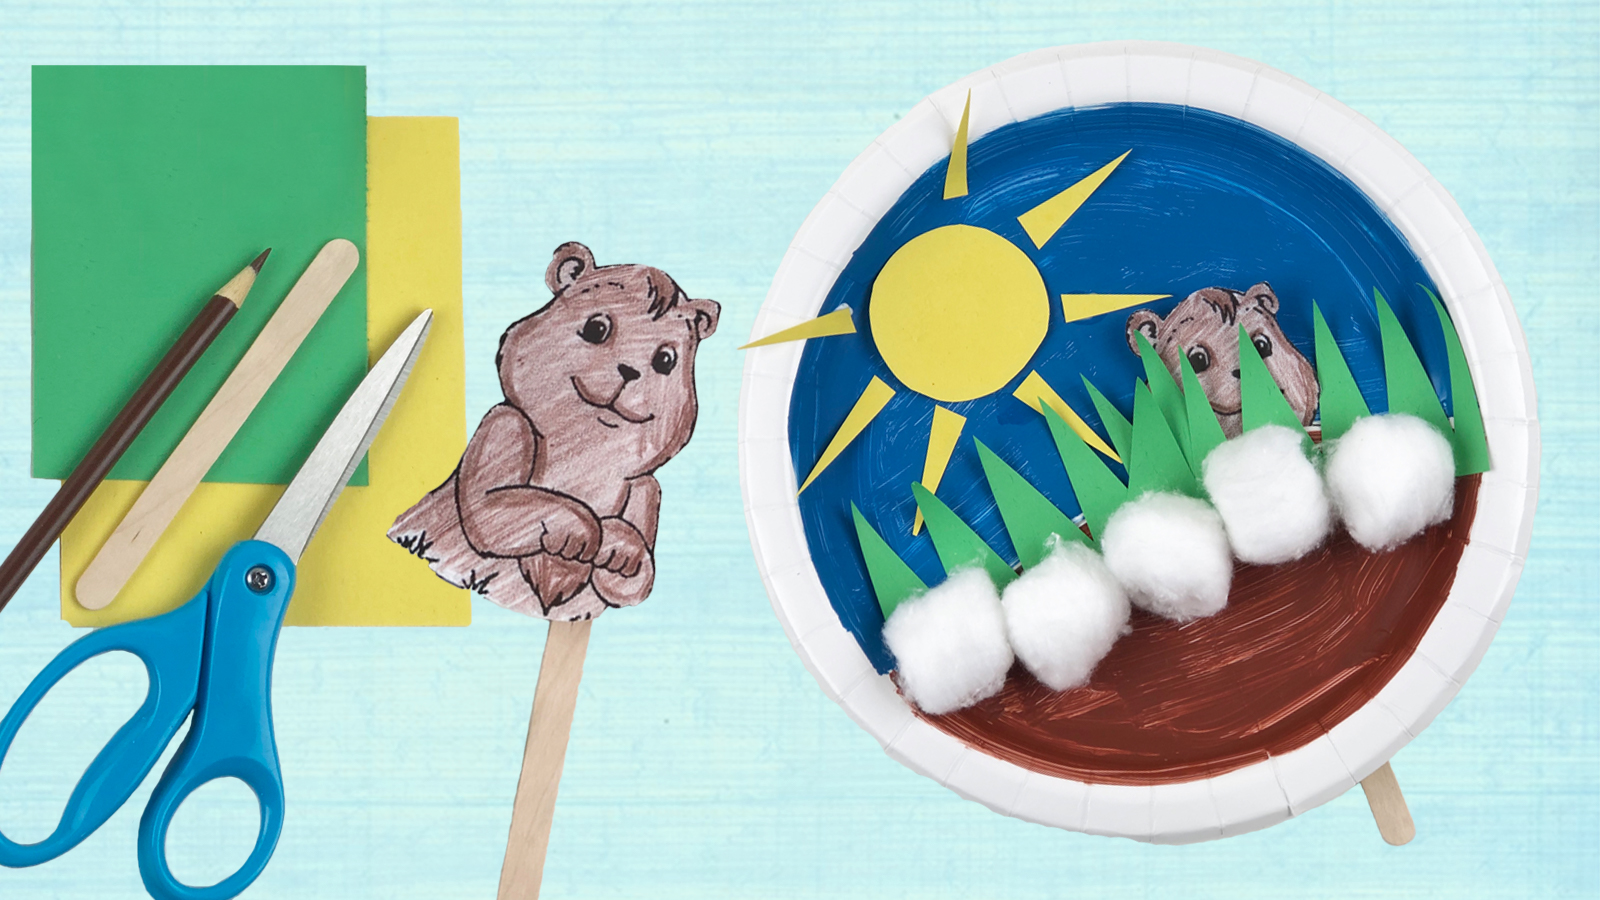 Groundhog Day Paper Plate Craft